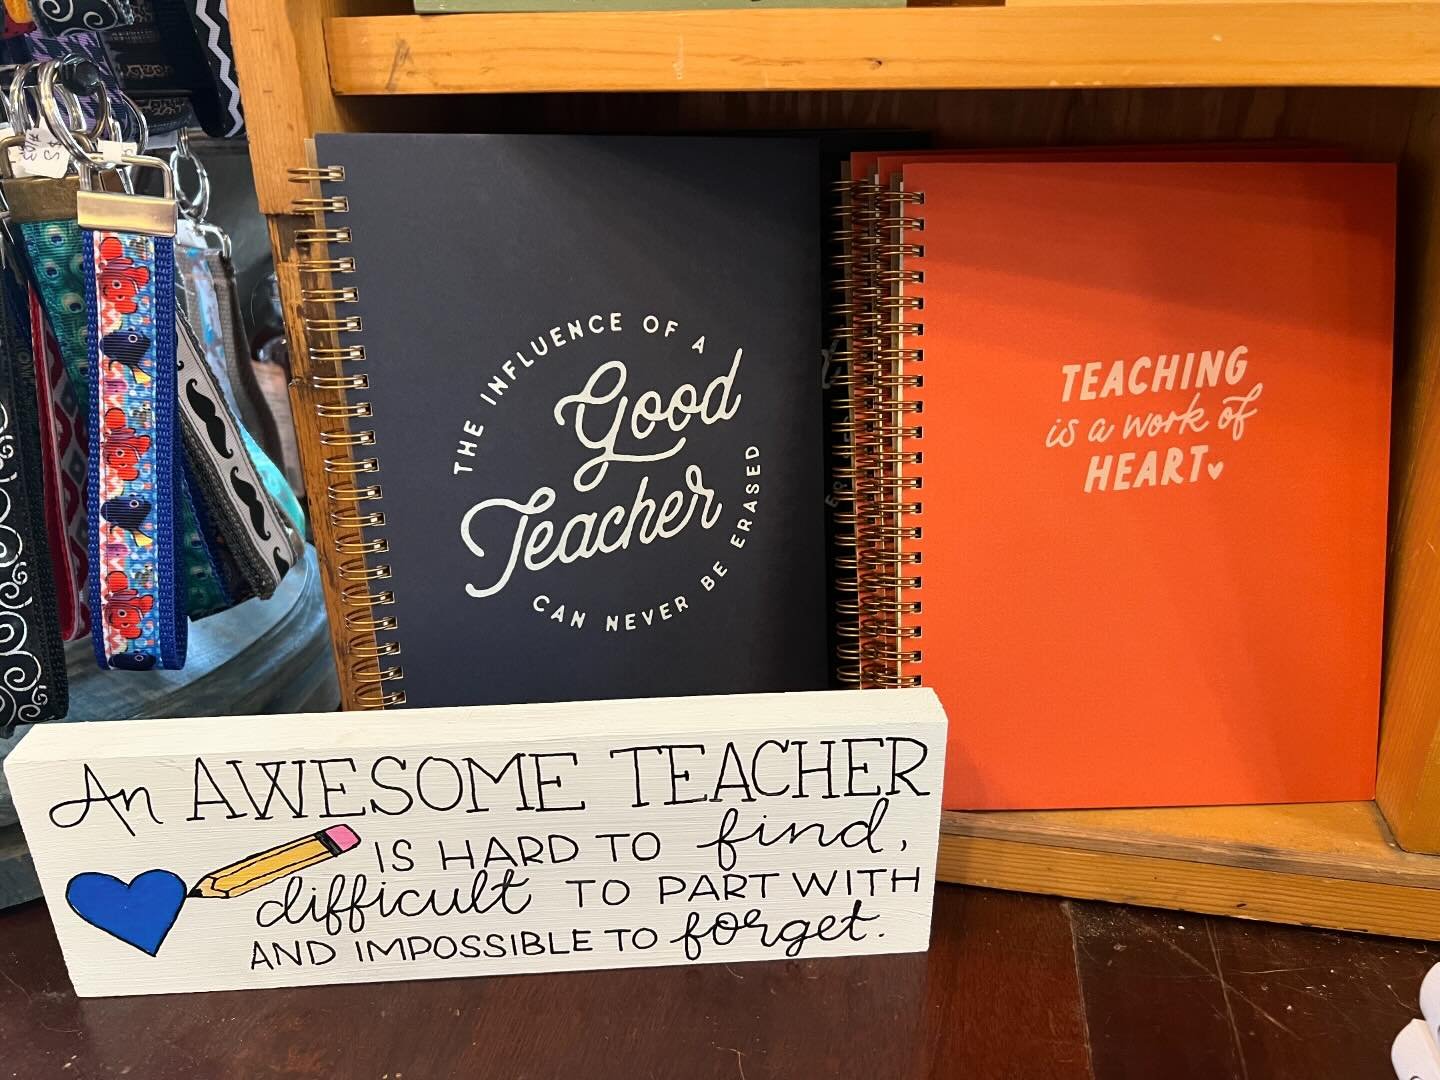 Don&rsquo;t forget this is Teacher Appreciation Week! We&rsquo;ve got you covered with gift ideas! Let those teachers know how special they are. 🍎📚✏️📒💻